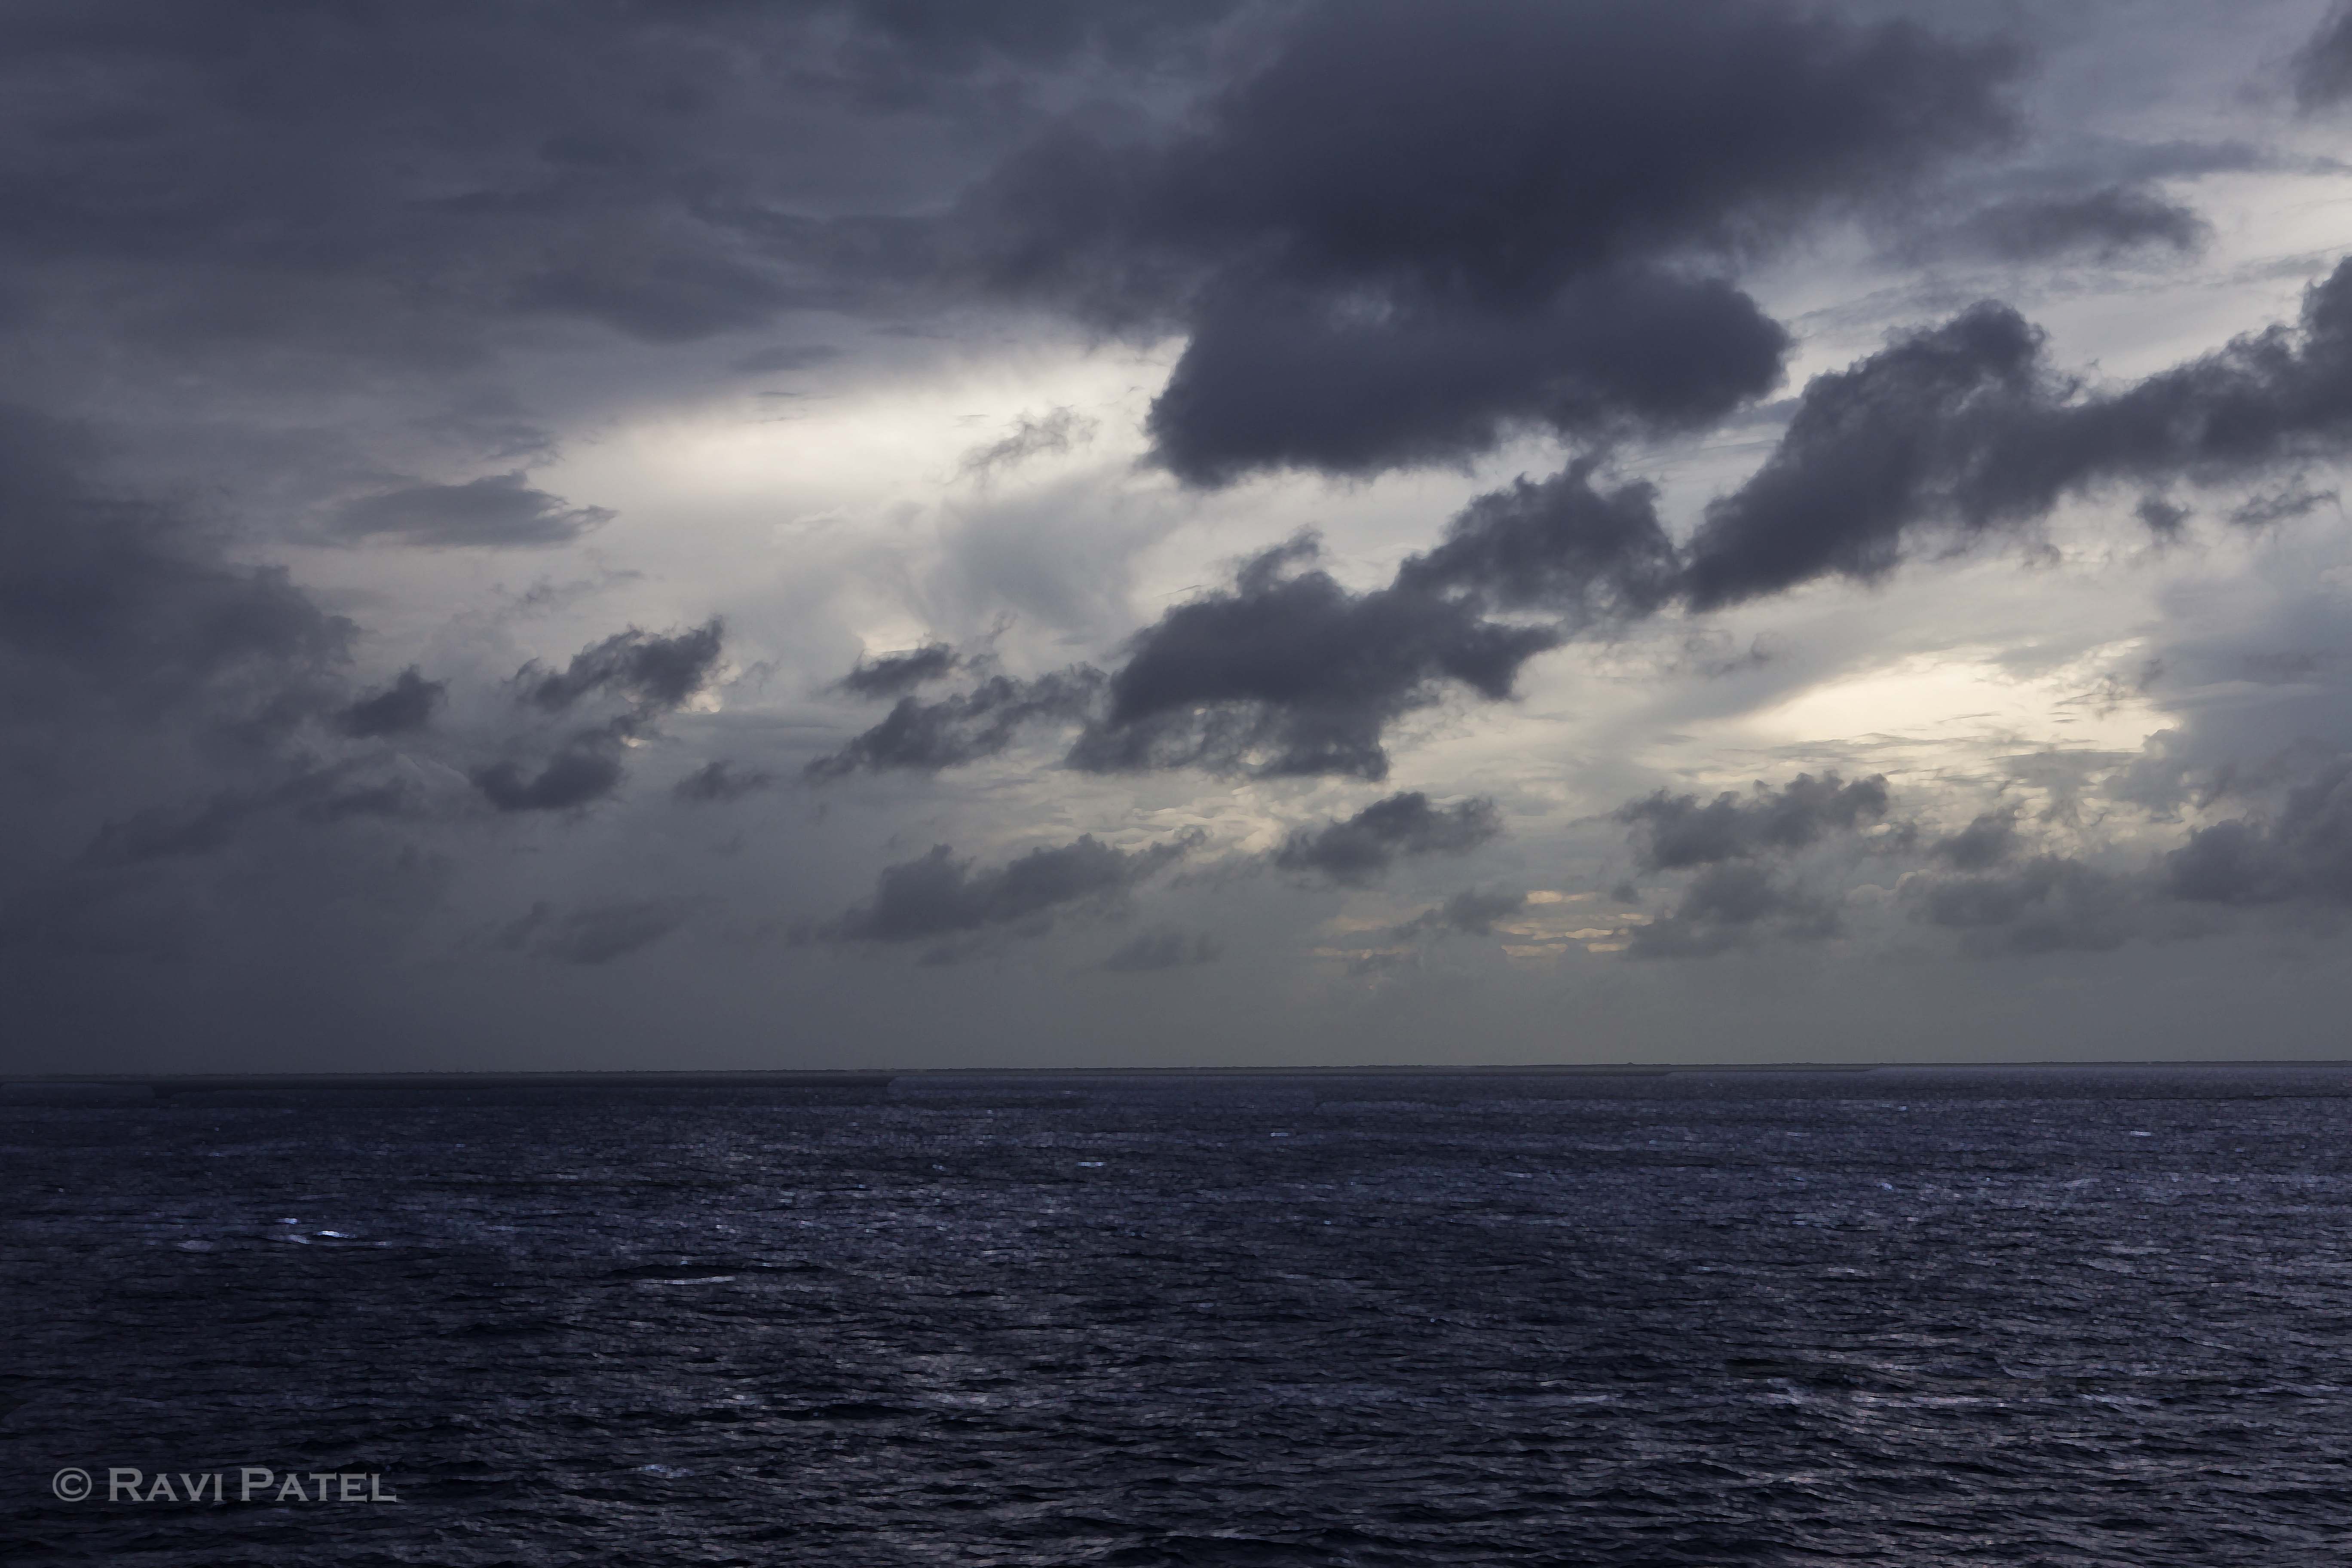 Stormy Skies at the High Seas | Photos by Ravi